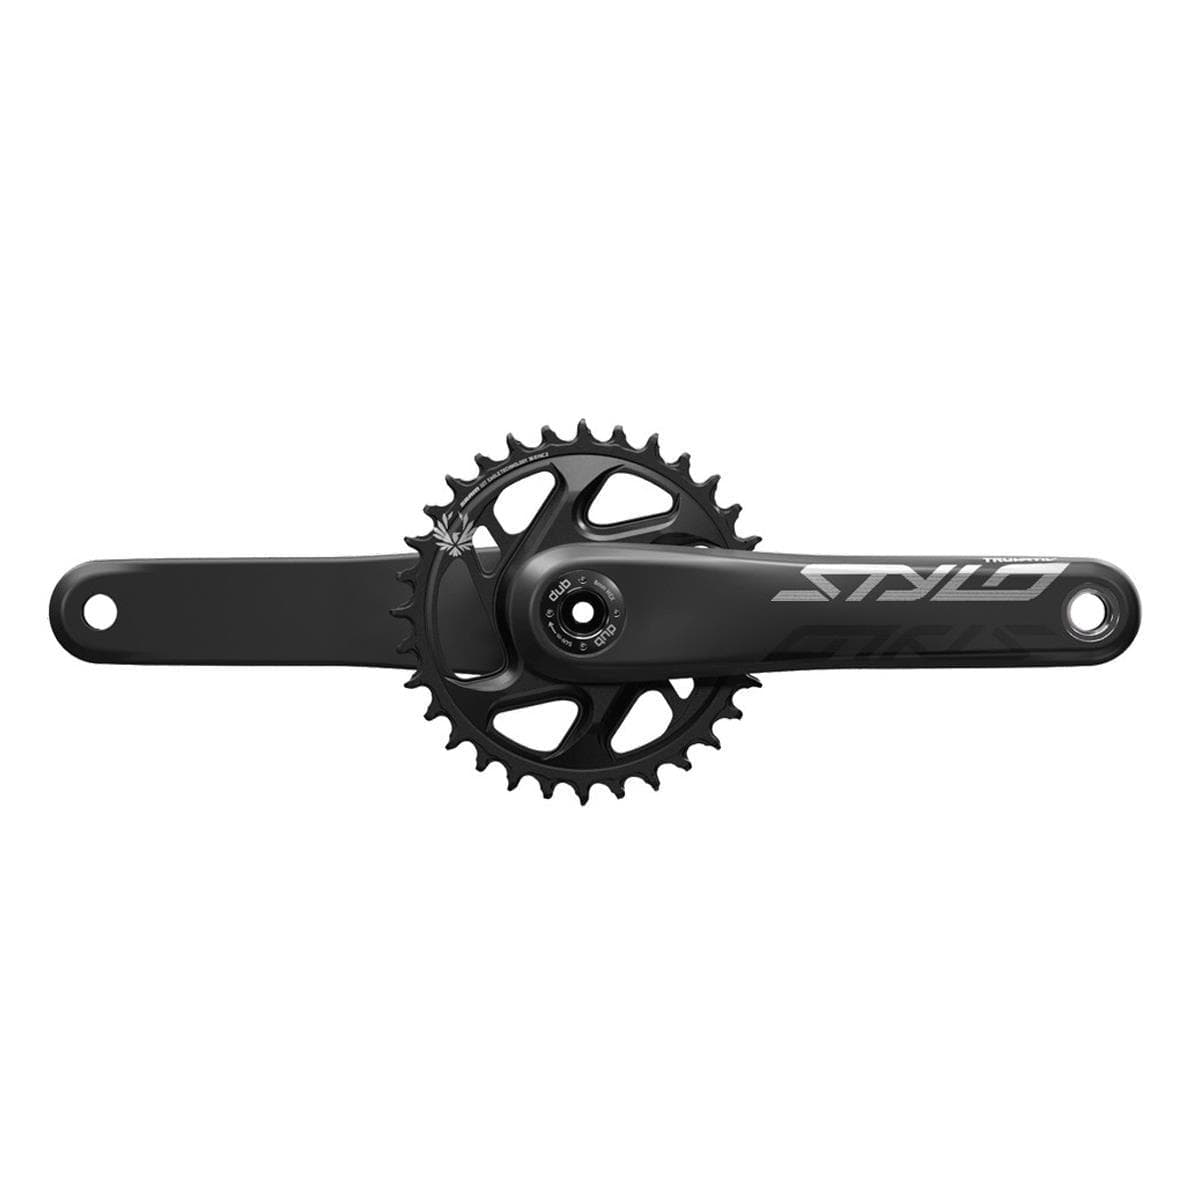 Truvativ Crank Stylo Carbon Eagle Fat Bike 5" Dub 12S 175 Wdirect Mount 30T X-Sync 2 Chainring Black (Dub Cups/Bearingsnot Included): Black 175Mm